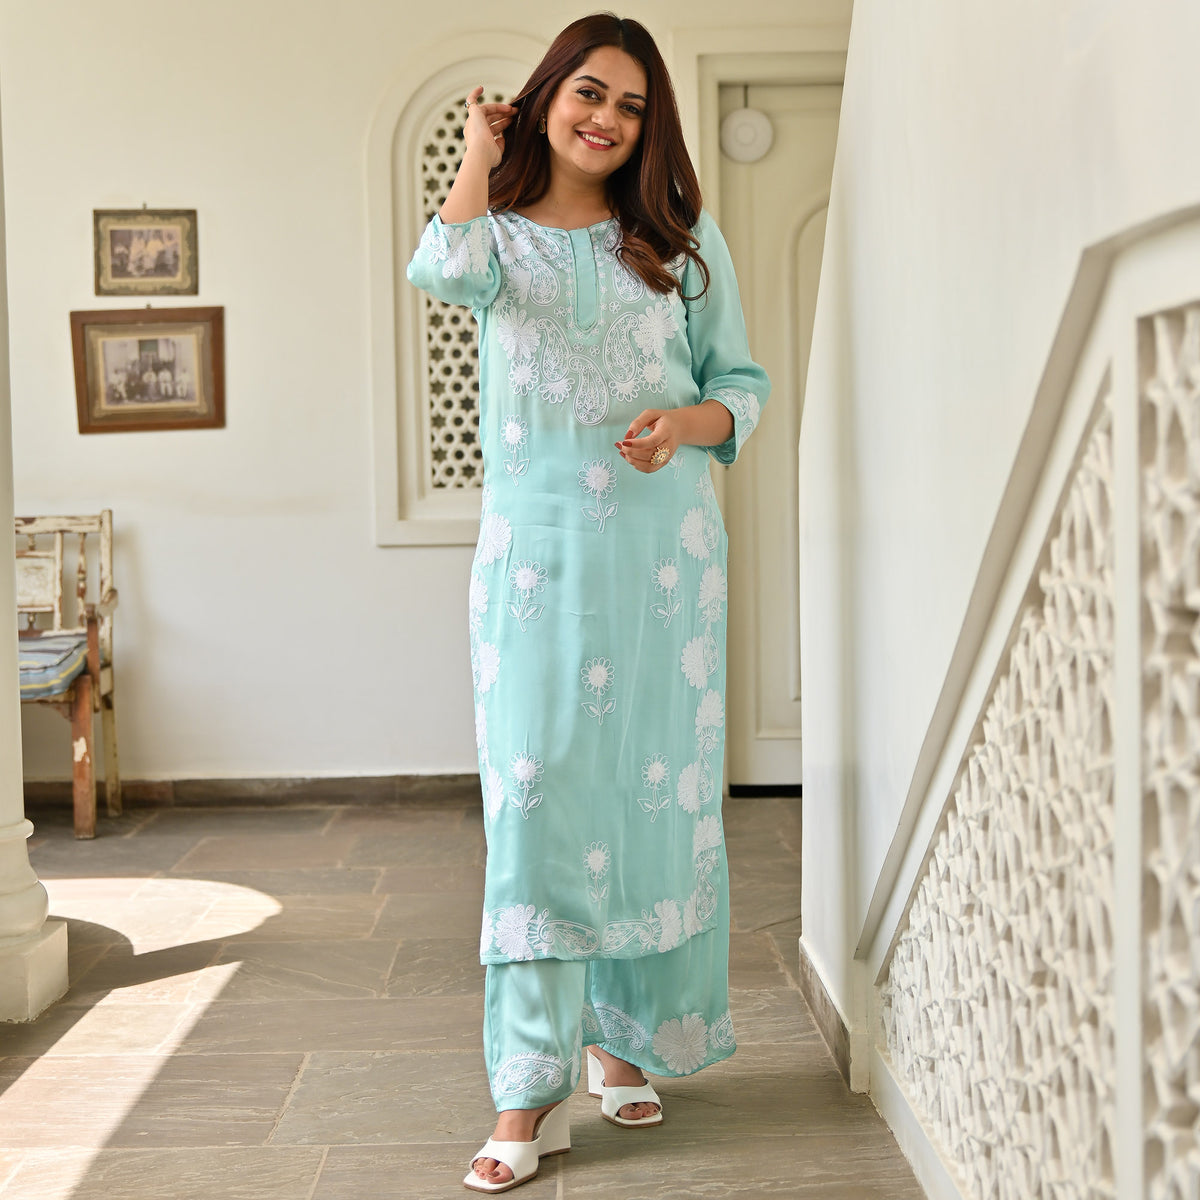 Teal Green Half Sleeve Kurtis Online Shopping for Women at Low Prices